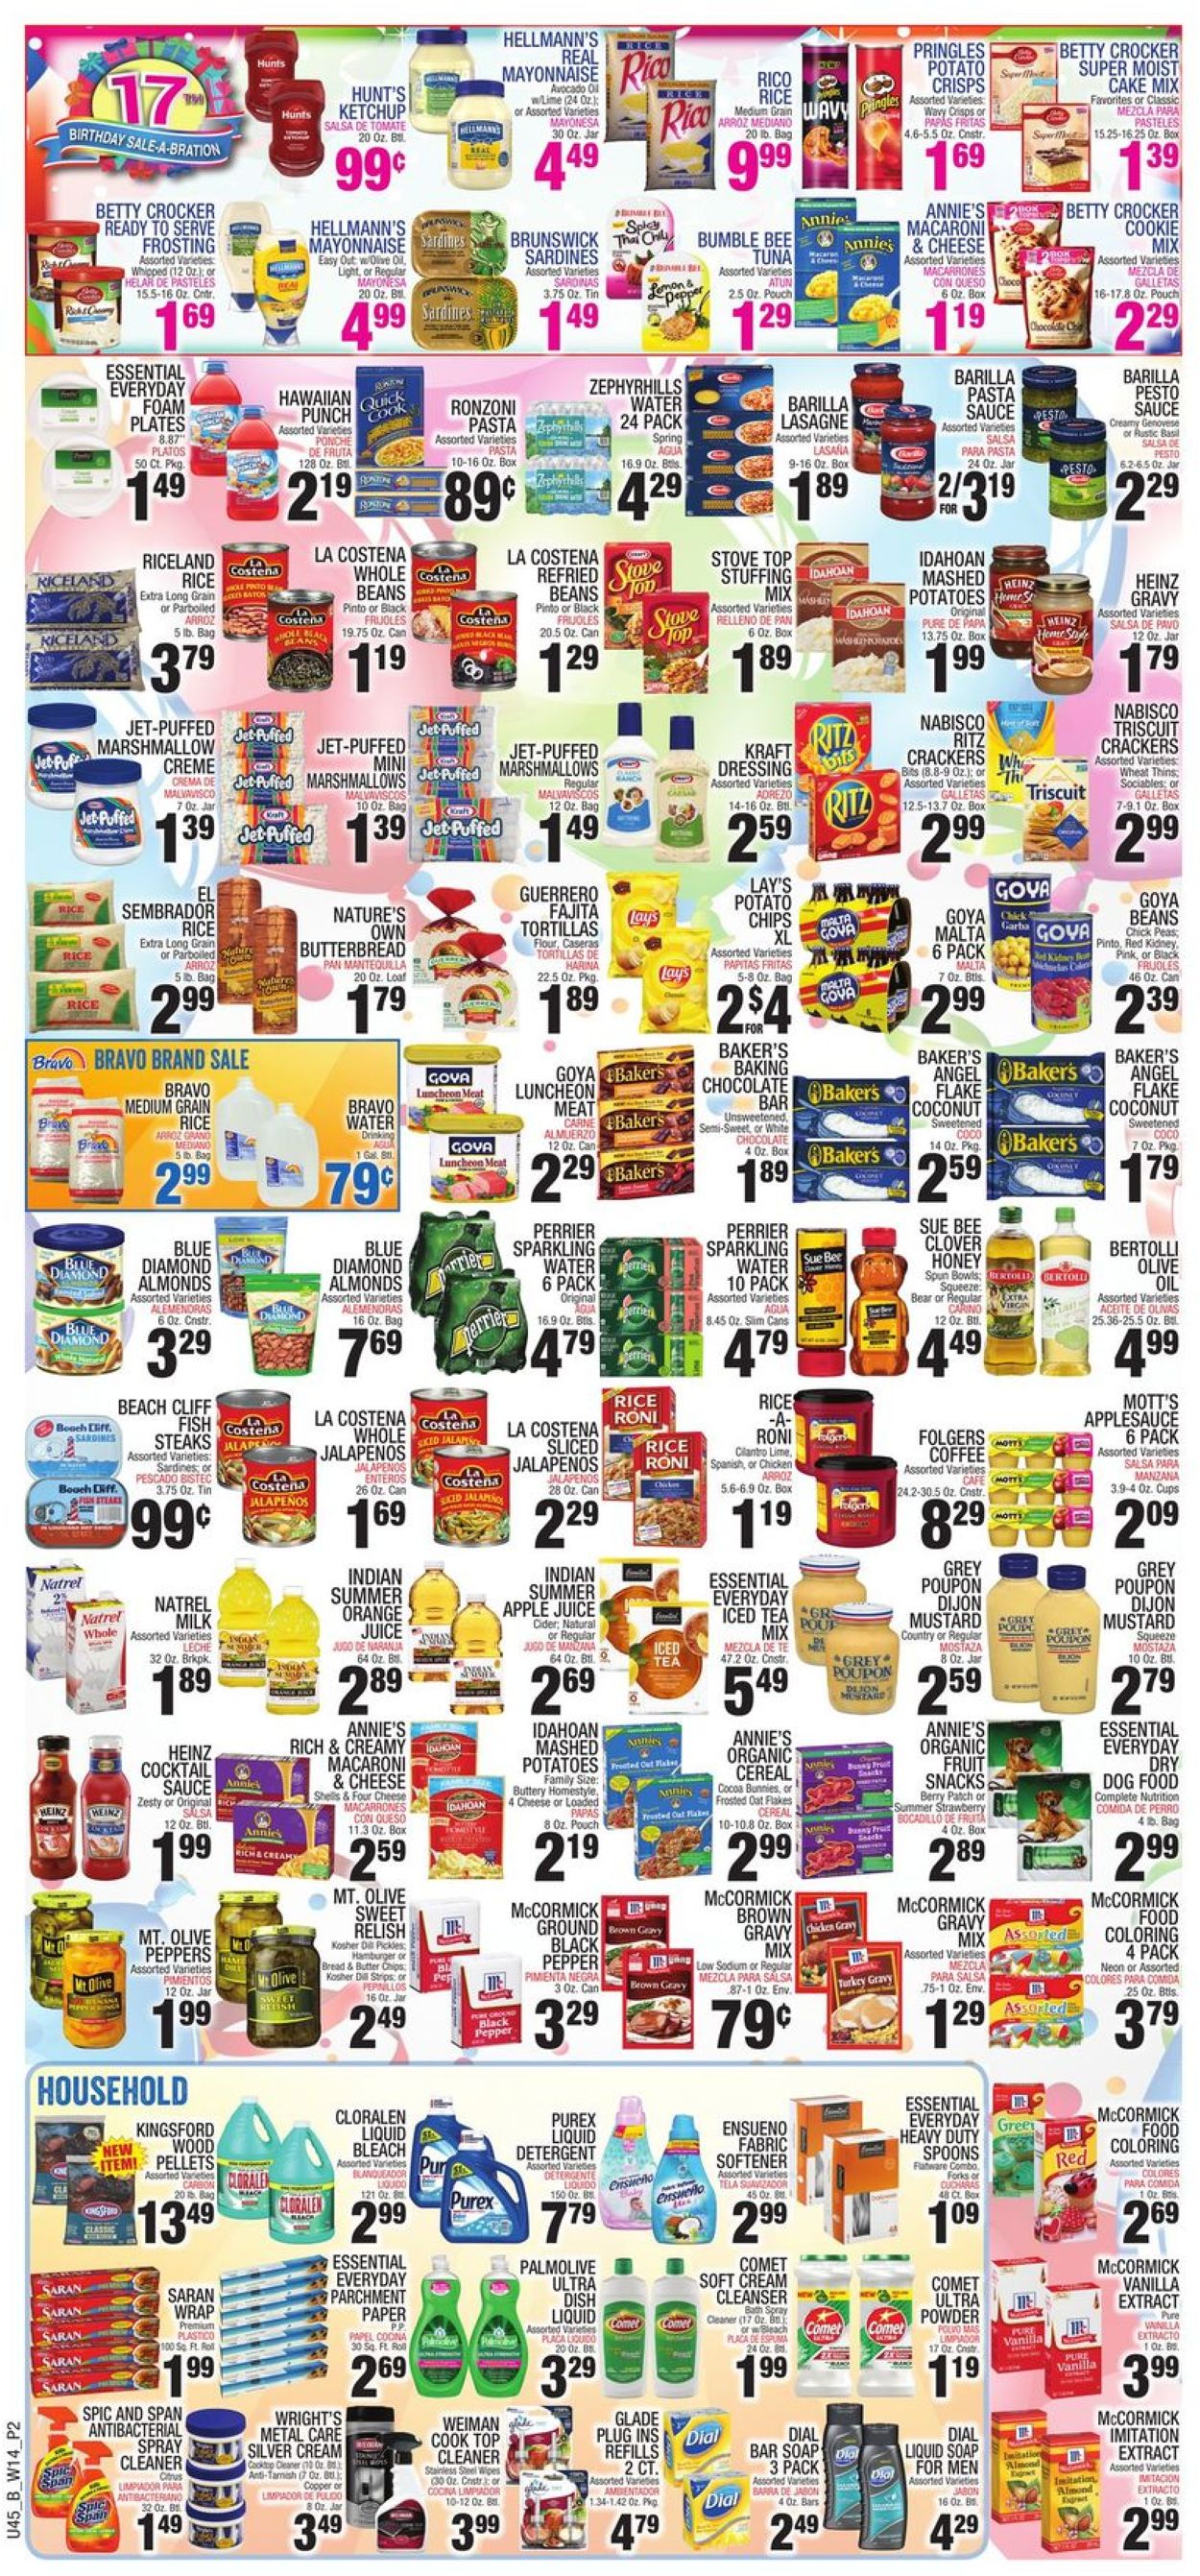 Catalogue Bravo Supermarkets Easter 2021 ad from 04/01/2021